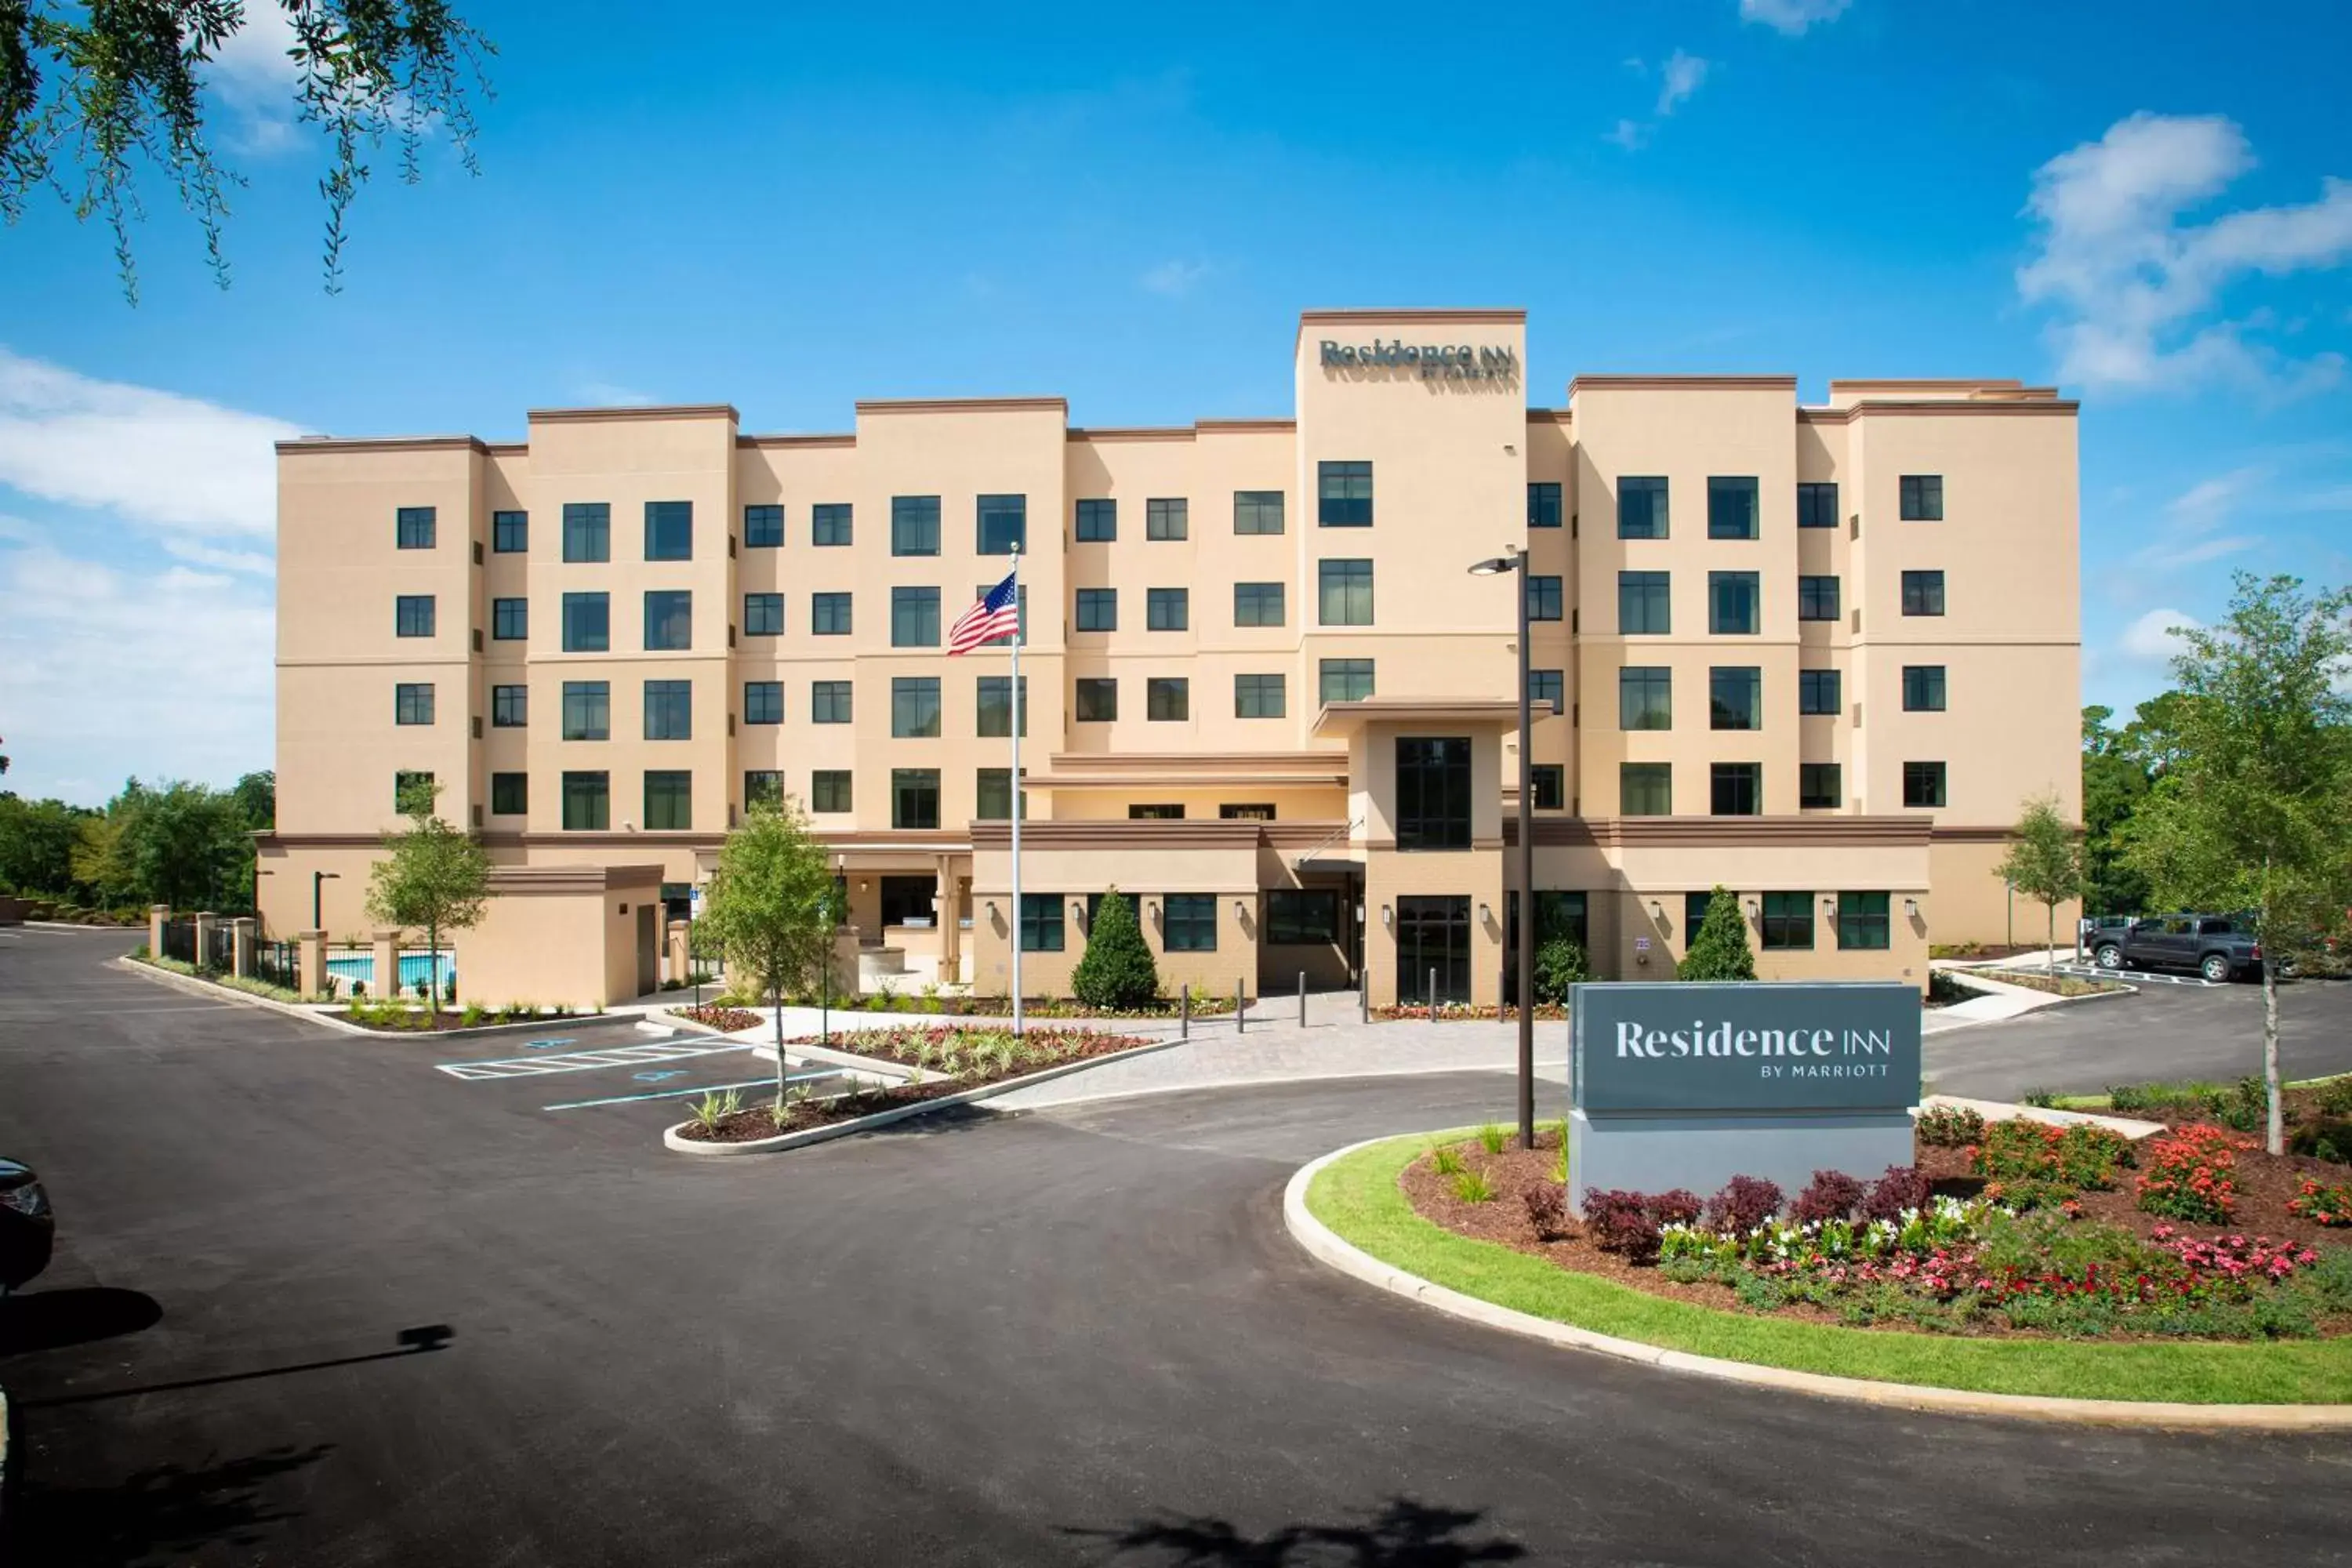 Property Building in Residence Inn by Marriott Pensacola Airport/Medical Center